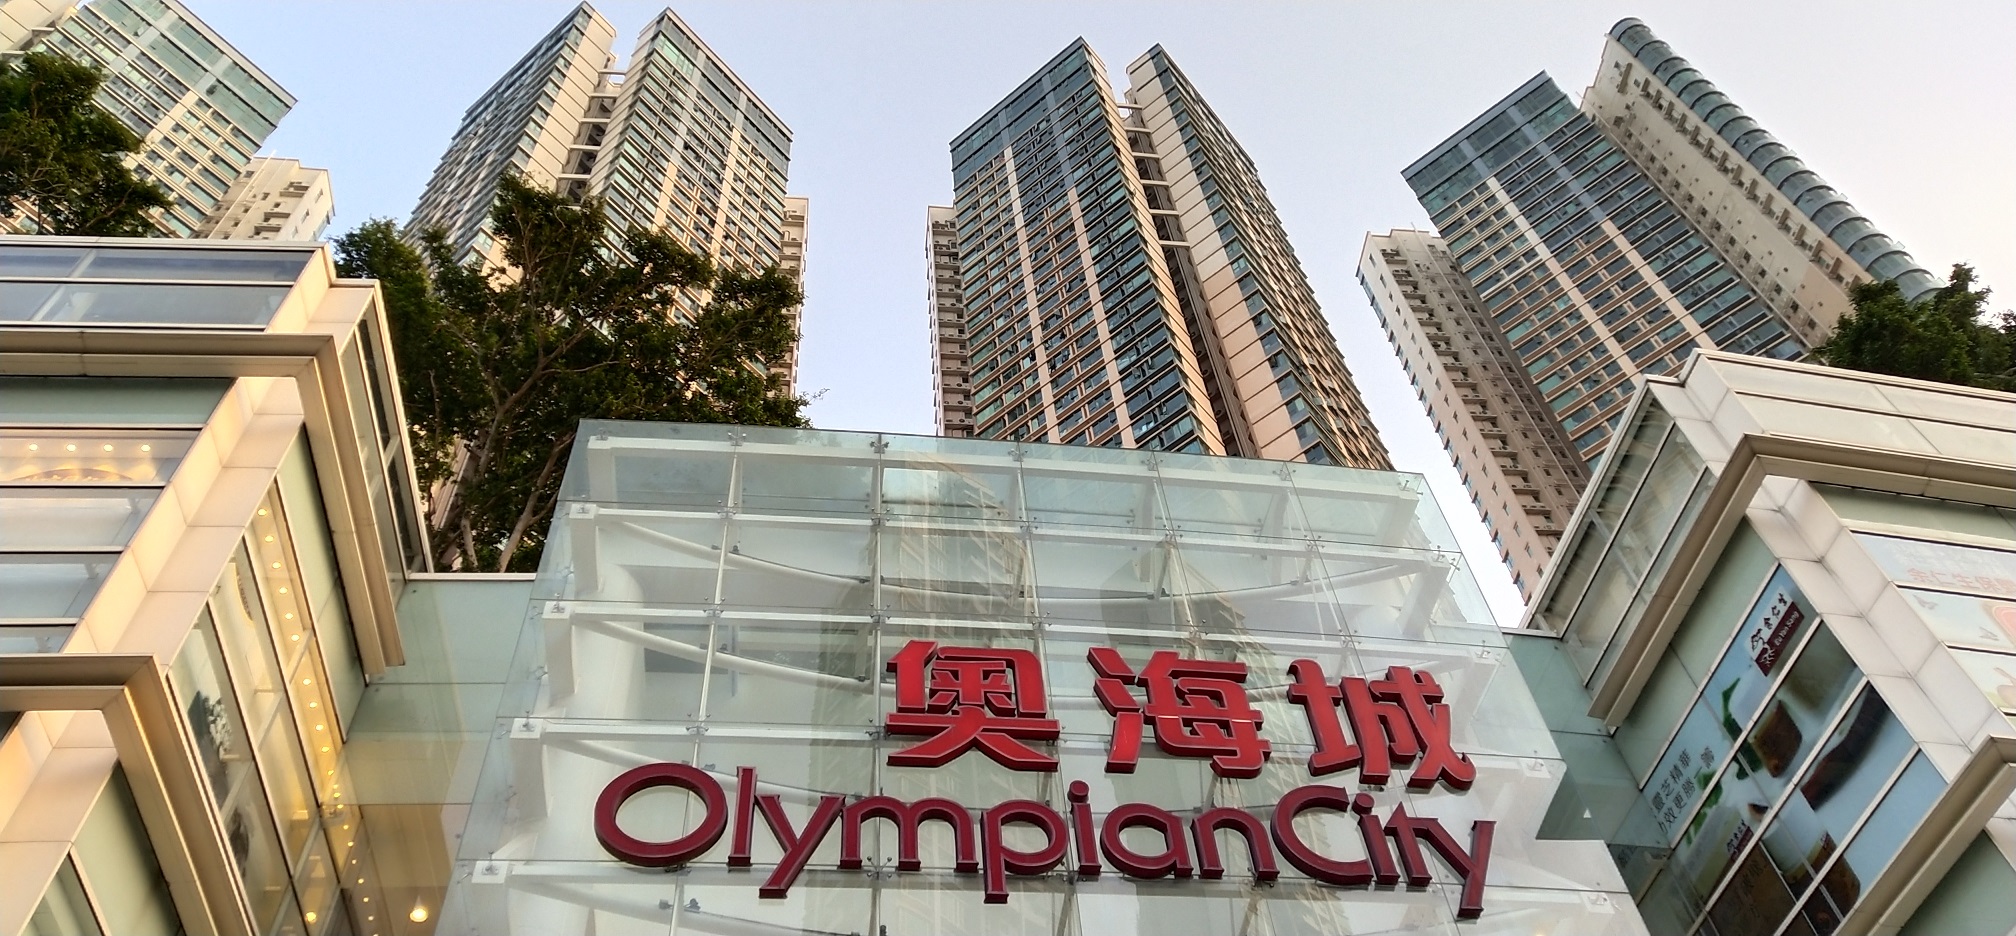 There are a lot of residential buildings on the rooftop of Olympian City Mall.There are a lot of residential buildings on the rooftop of Olympian City Mall.